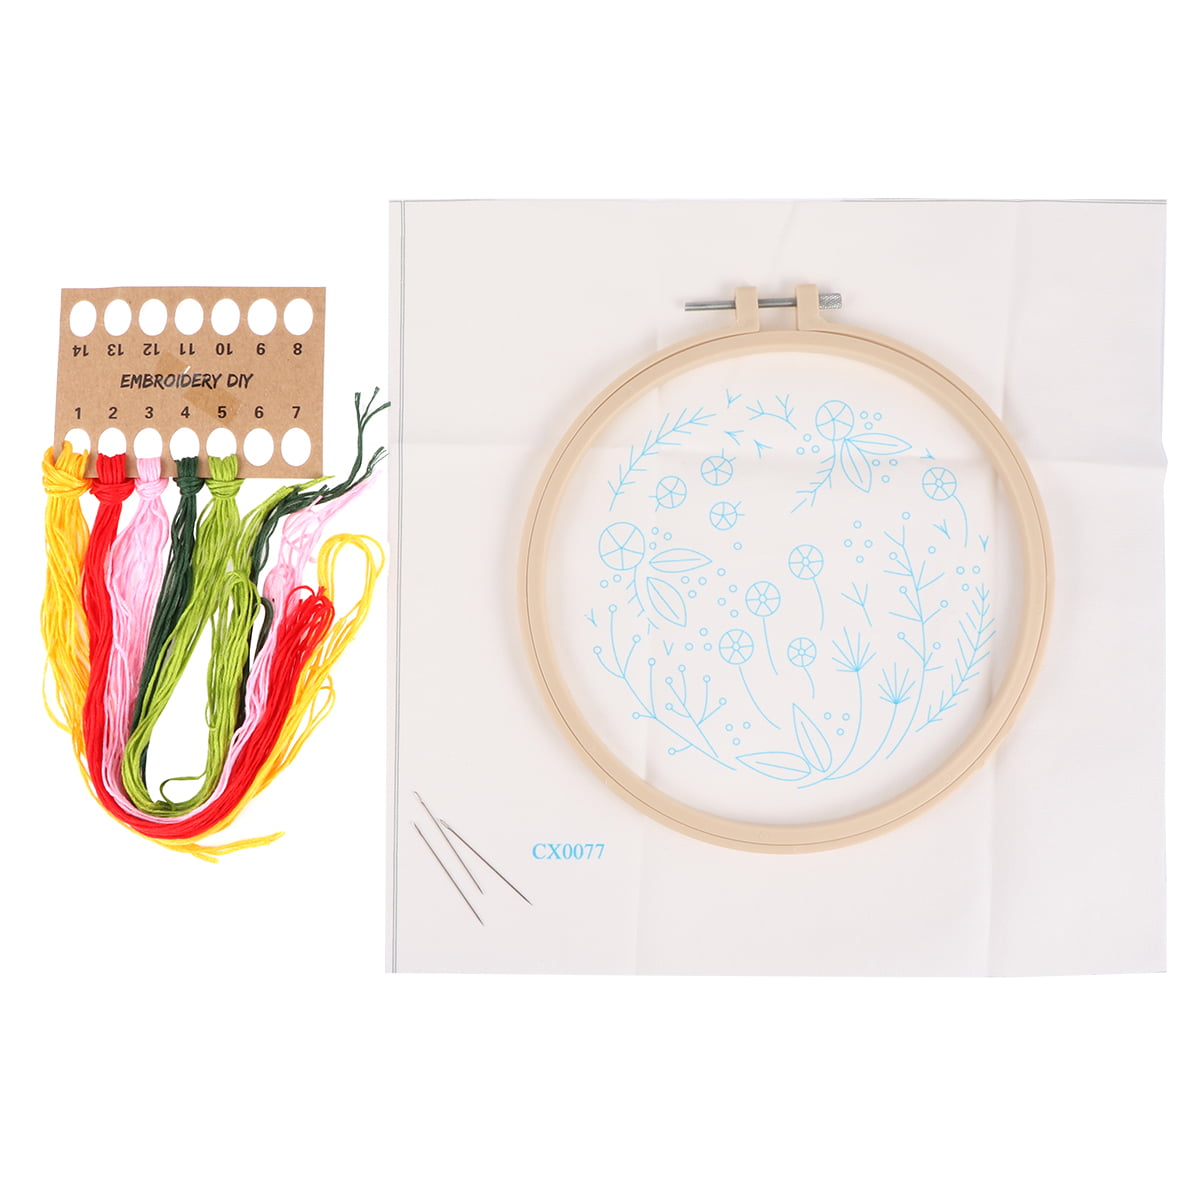 Embroidery Floss Kit for Beginners with Bobbins, Beads, Ribbons